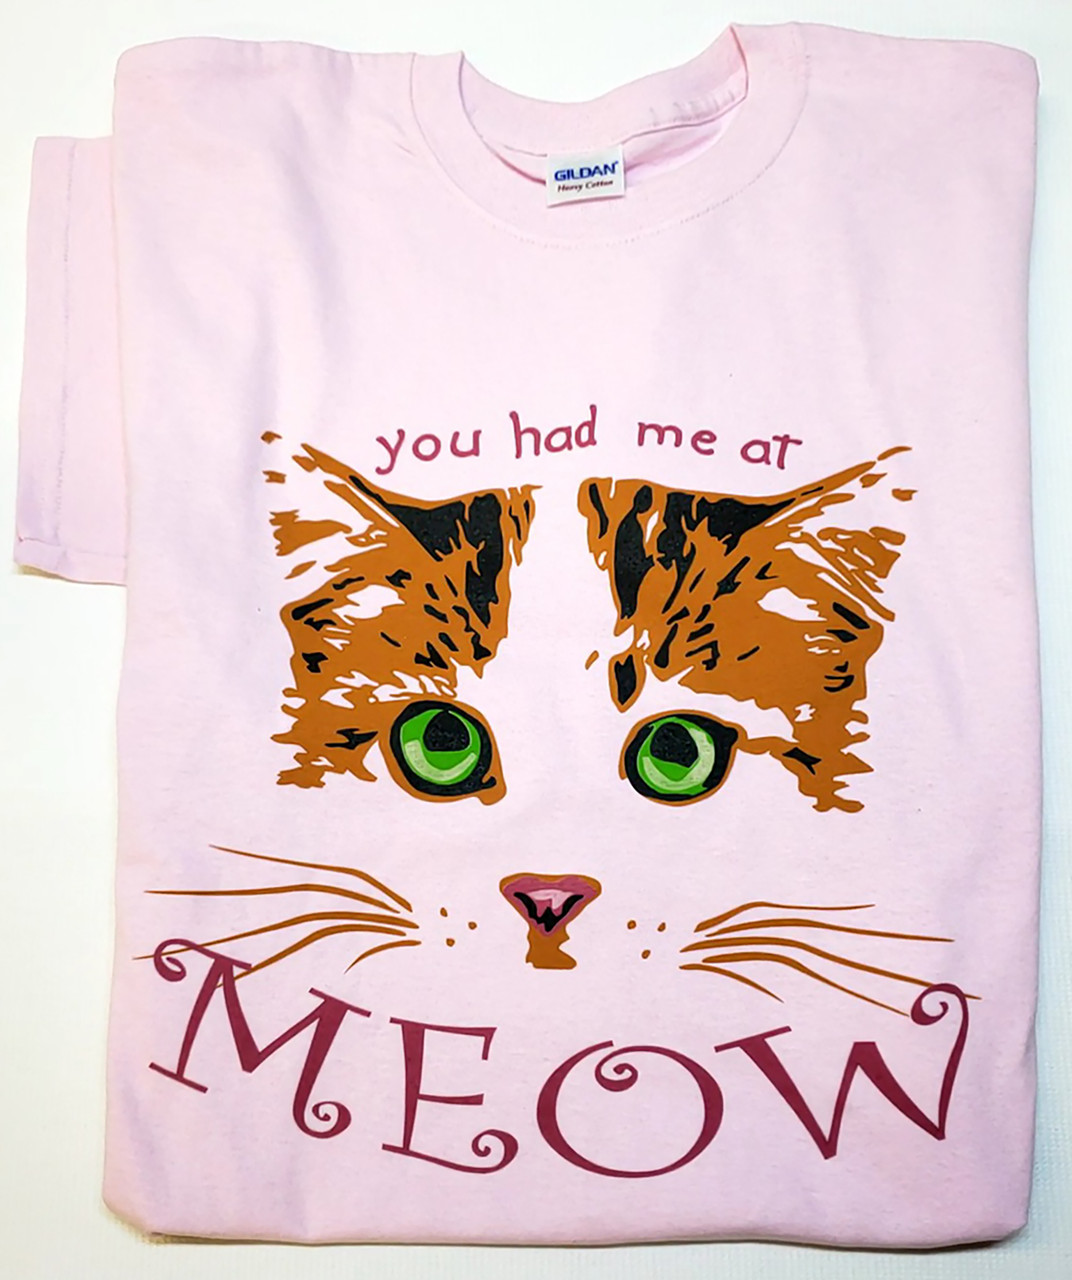 me at Meow T-shirt Funny Cat Tee